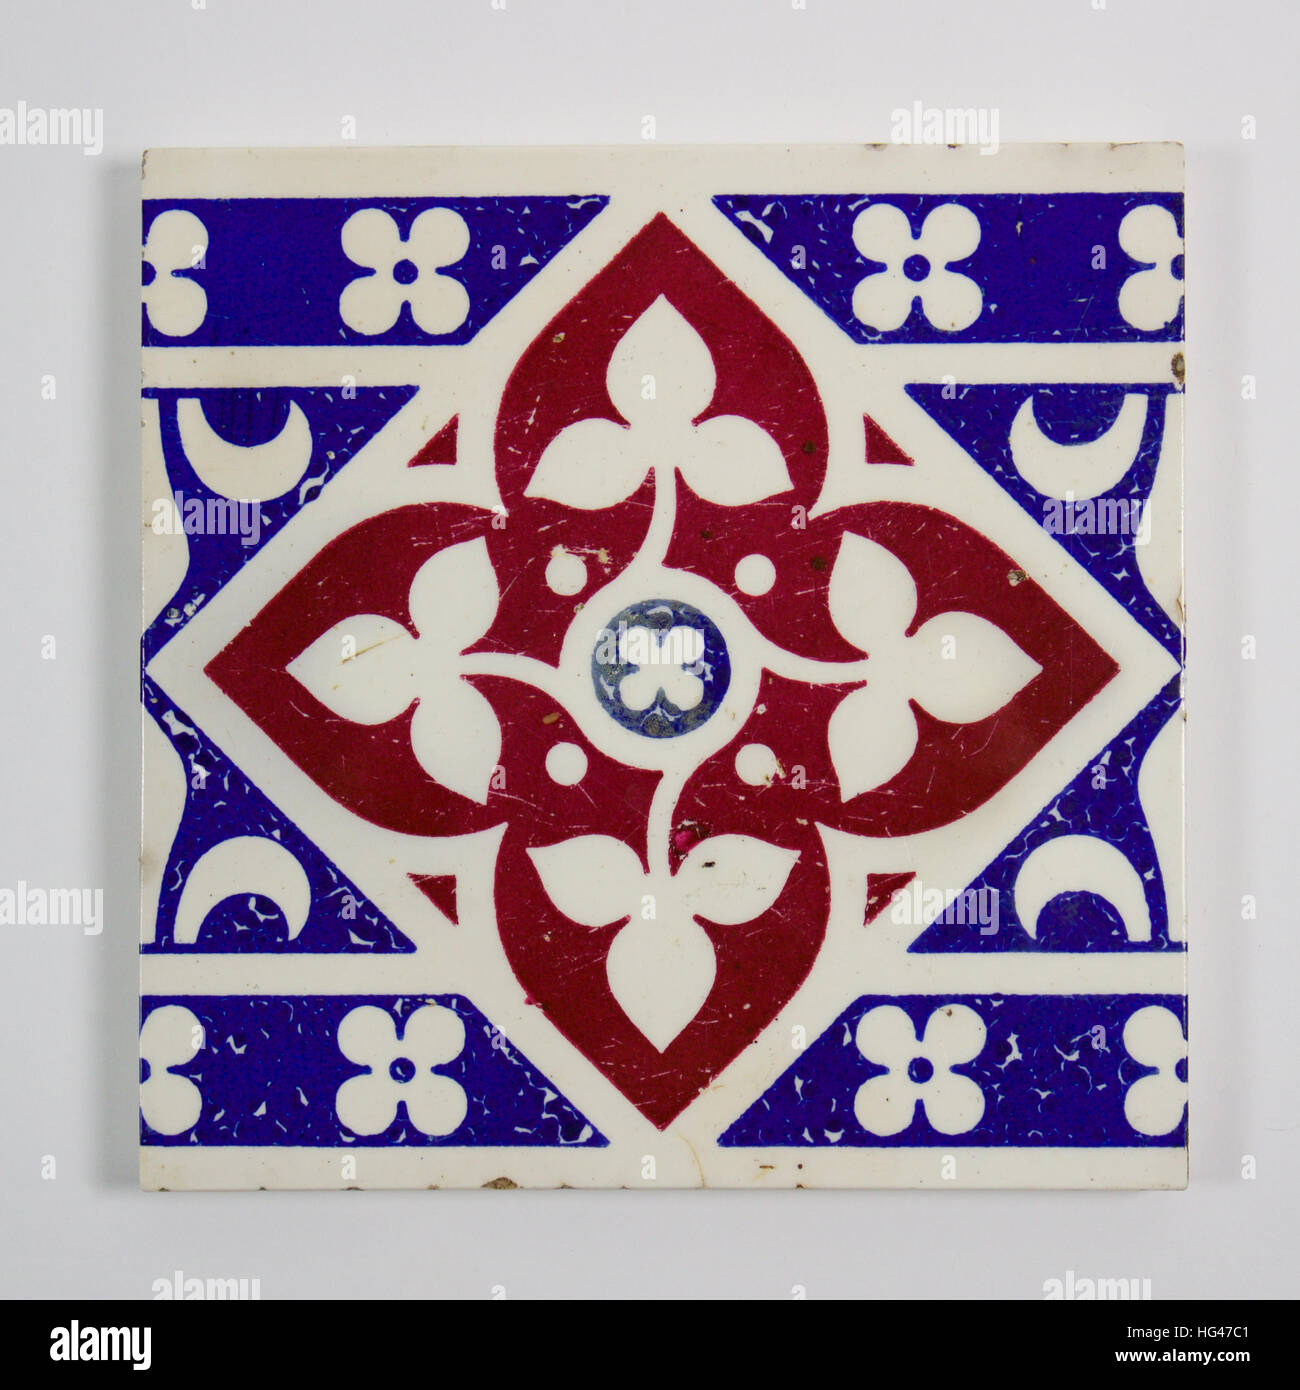 Antique Minton Gothic Revival tile designed by A.W.N. Pugin circa 1850. Printed in red and blue with fles de lys and quatrefoils. The tile measures ap Stock Photo